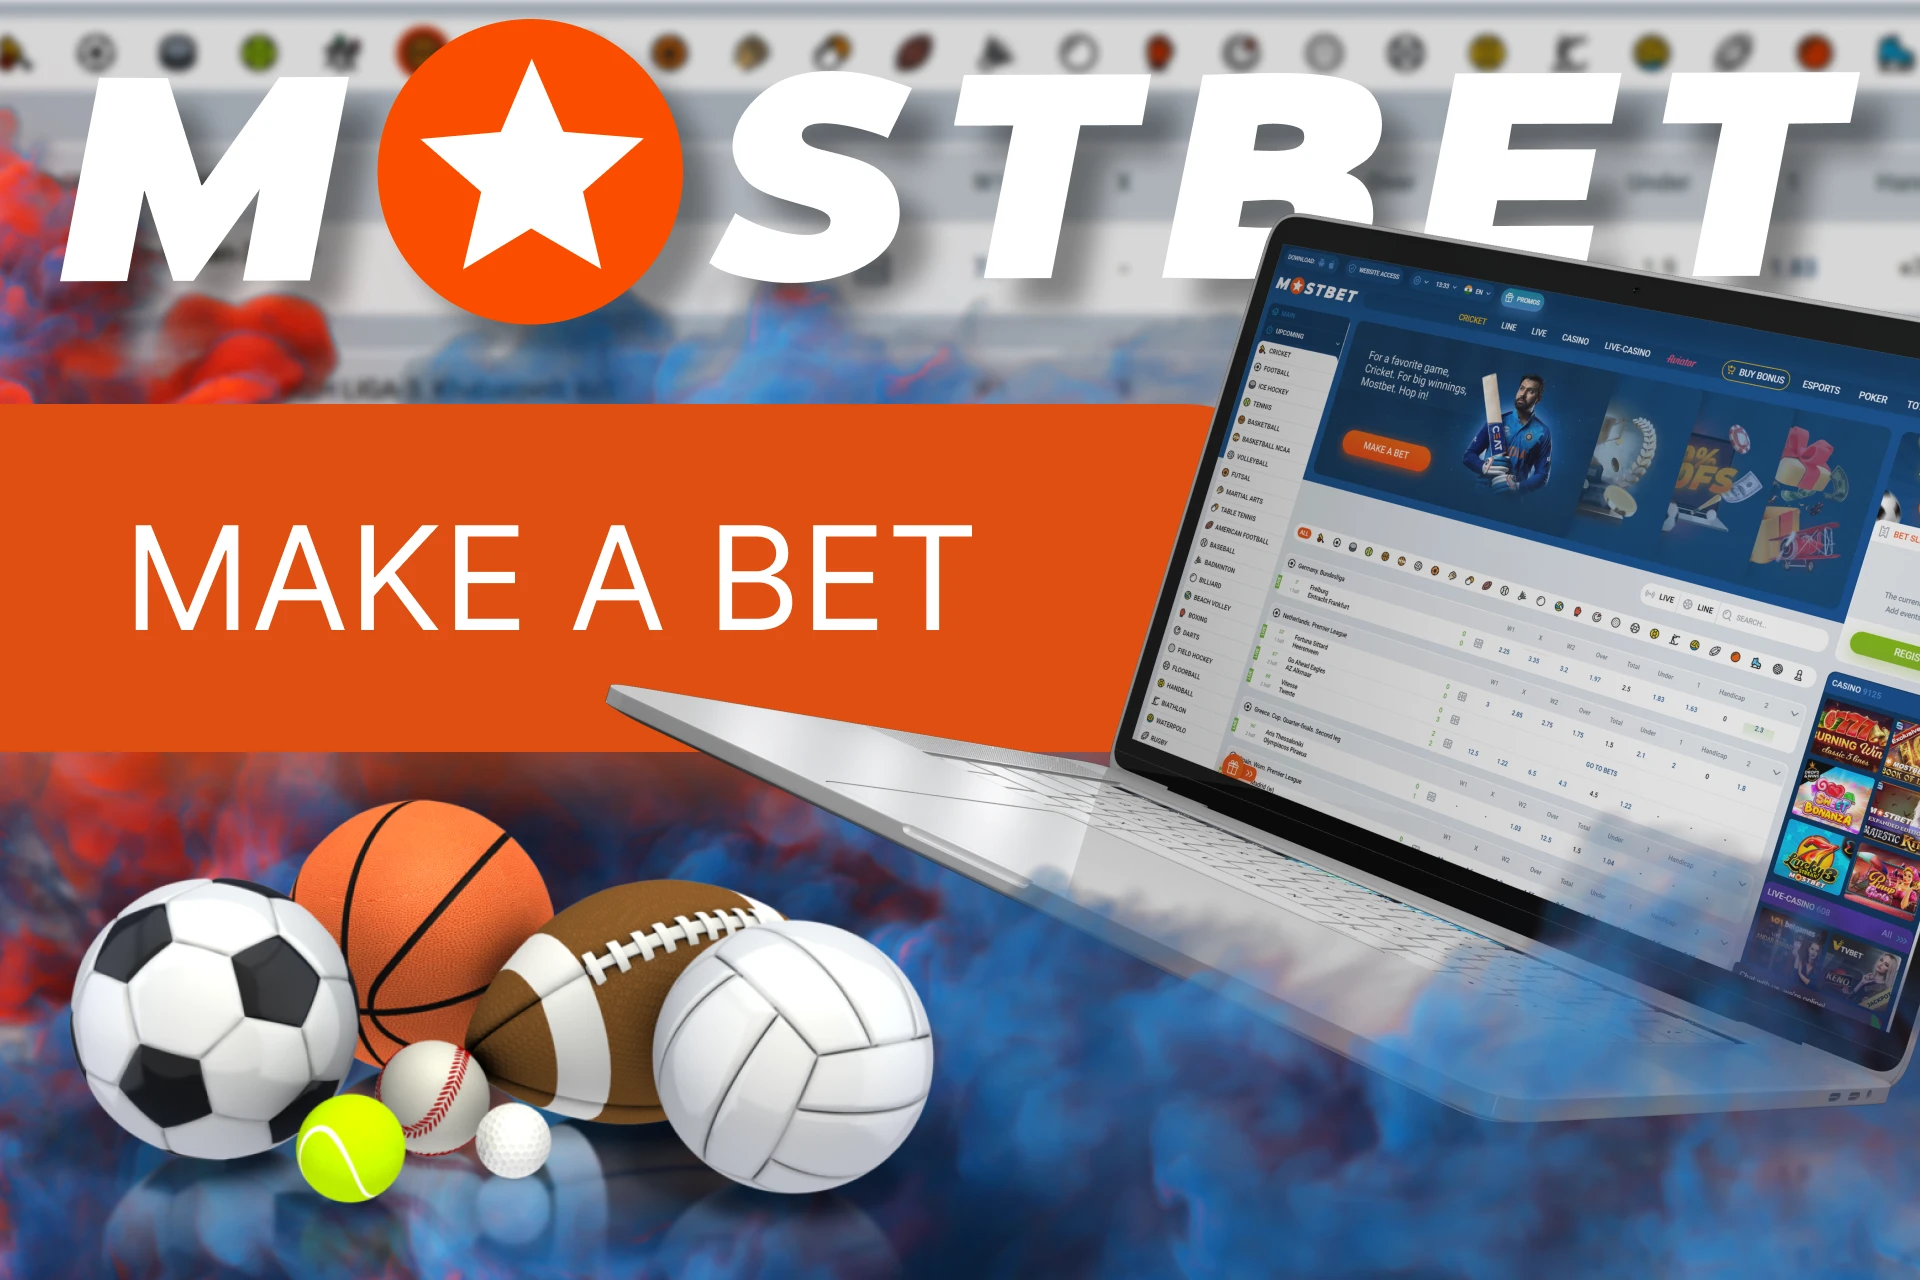 At Mostbet, bet on other sports apart from tennis.